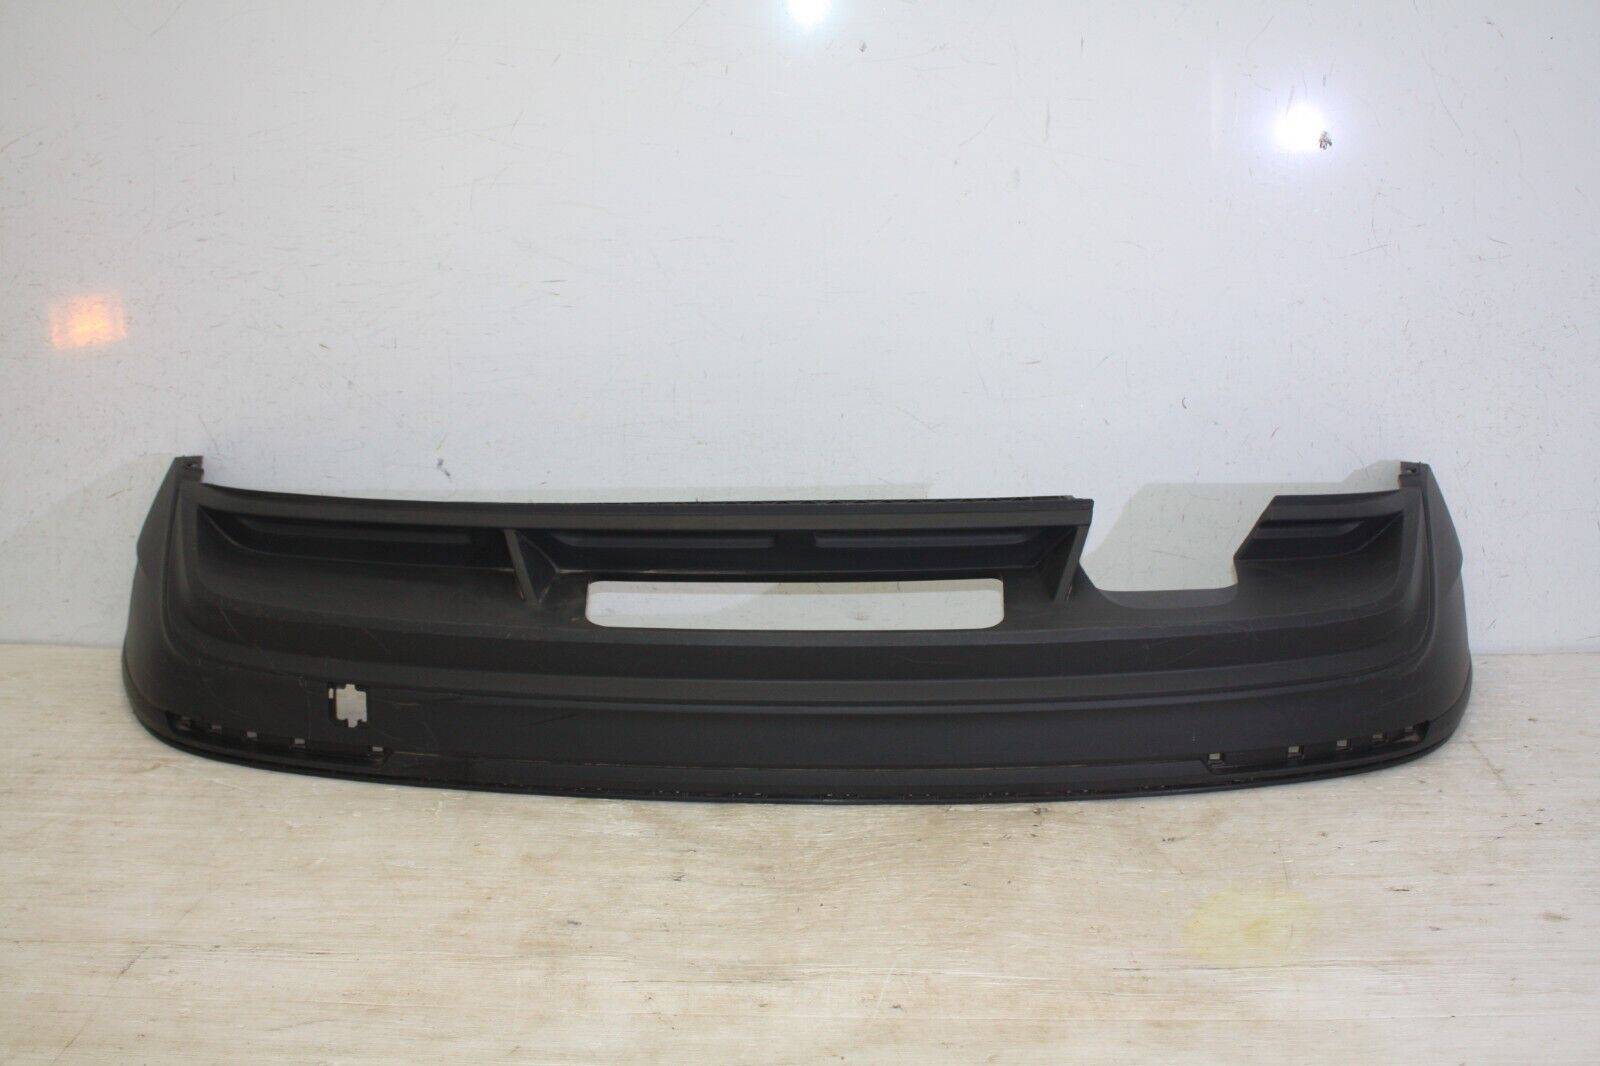 VW-Tiguan-Rear-Bumper-Lower-Section-2016-TO-2020-5NA807521-Genuine-176149756046